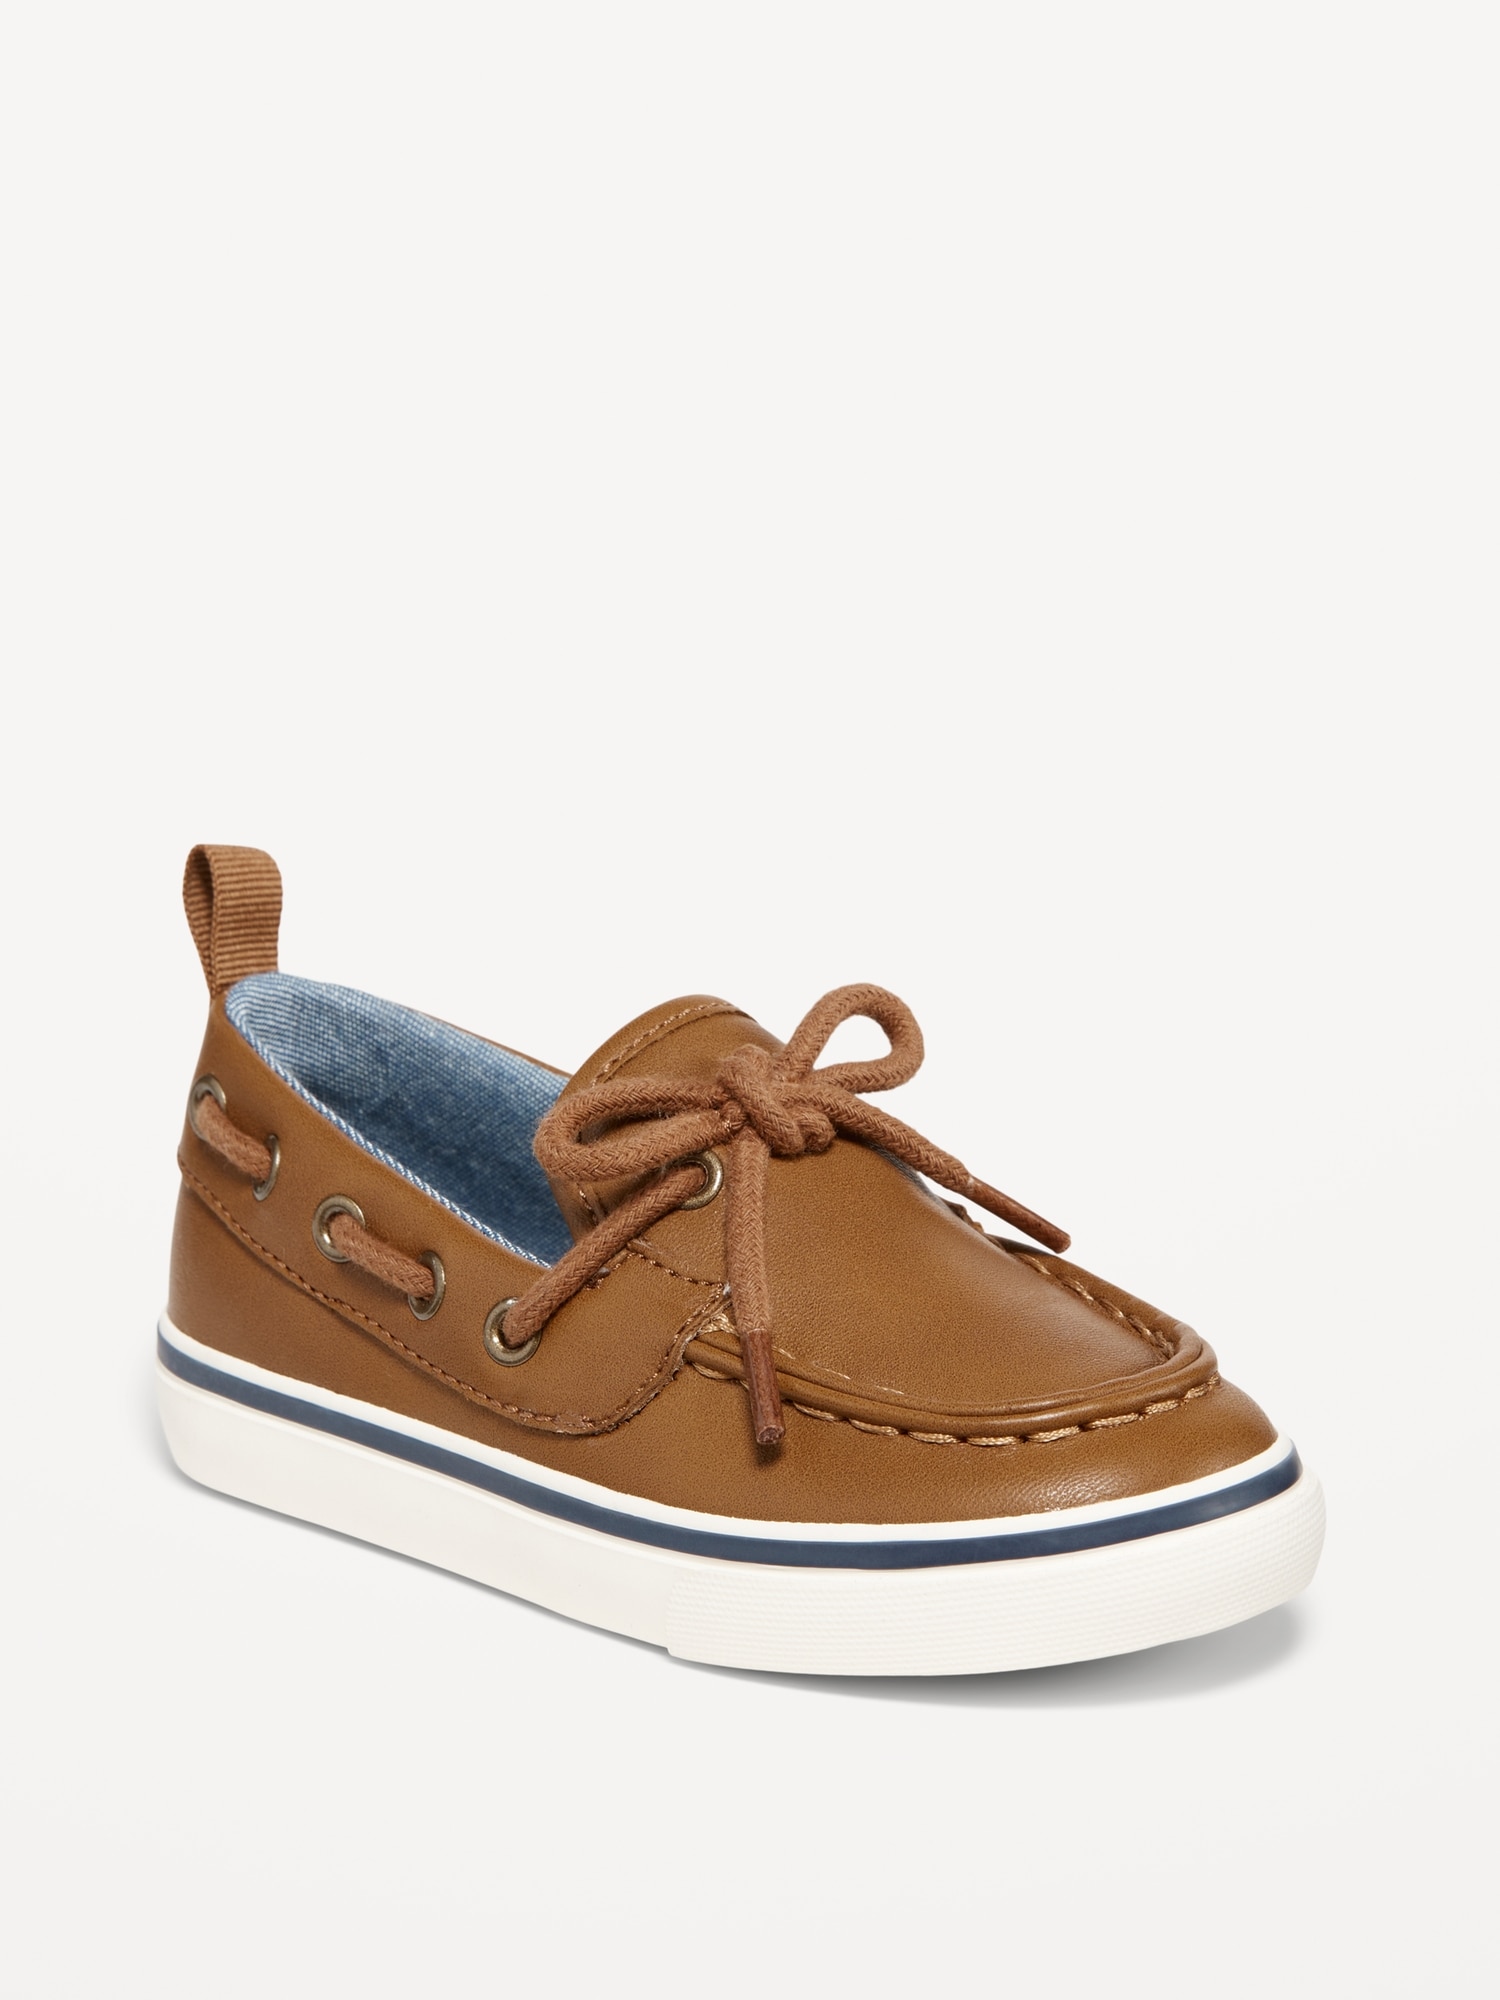 Faux-Leather Boat Shoes for Toddler Boys